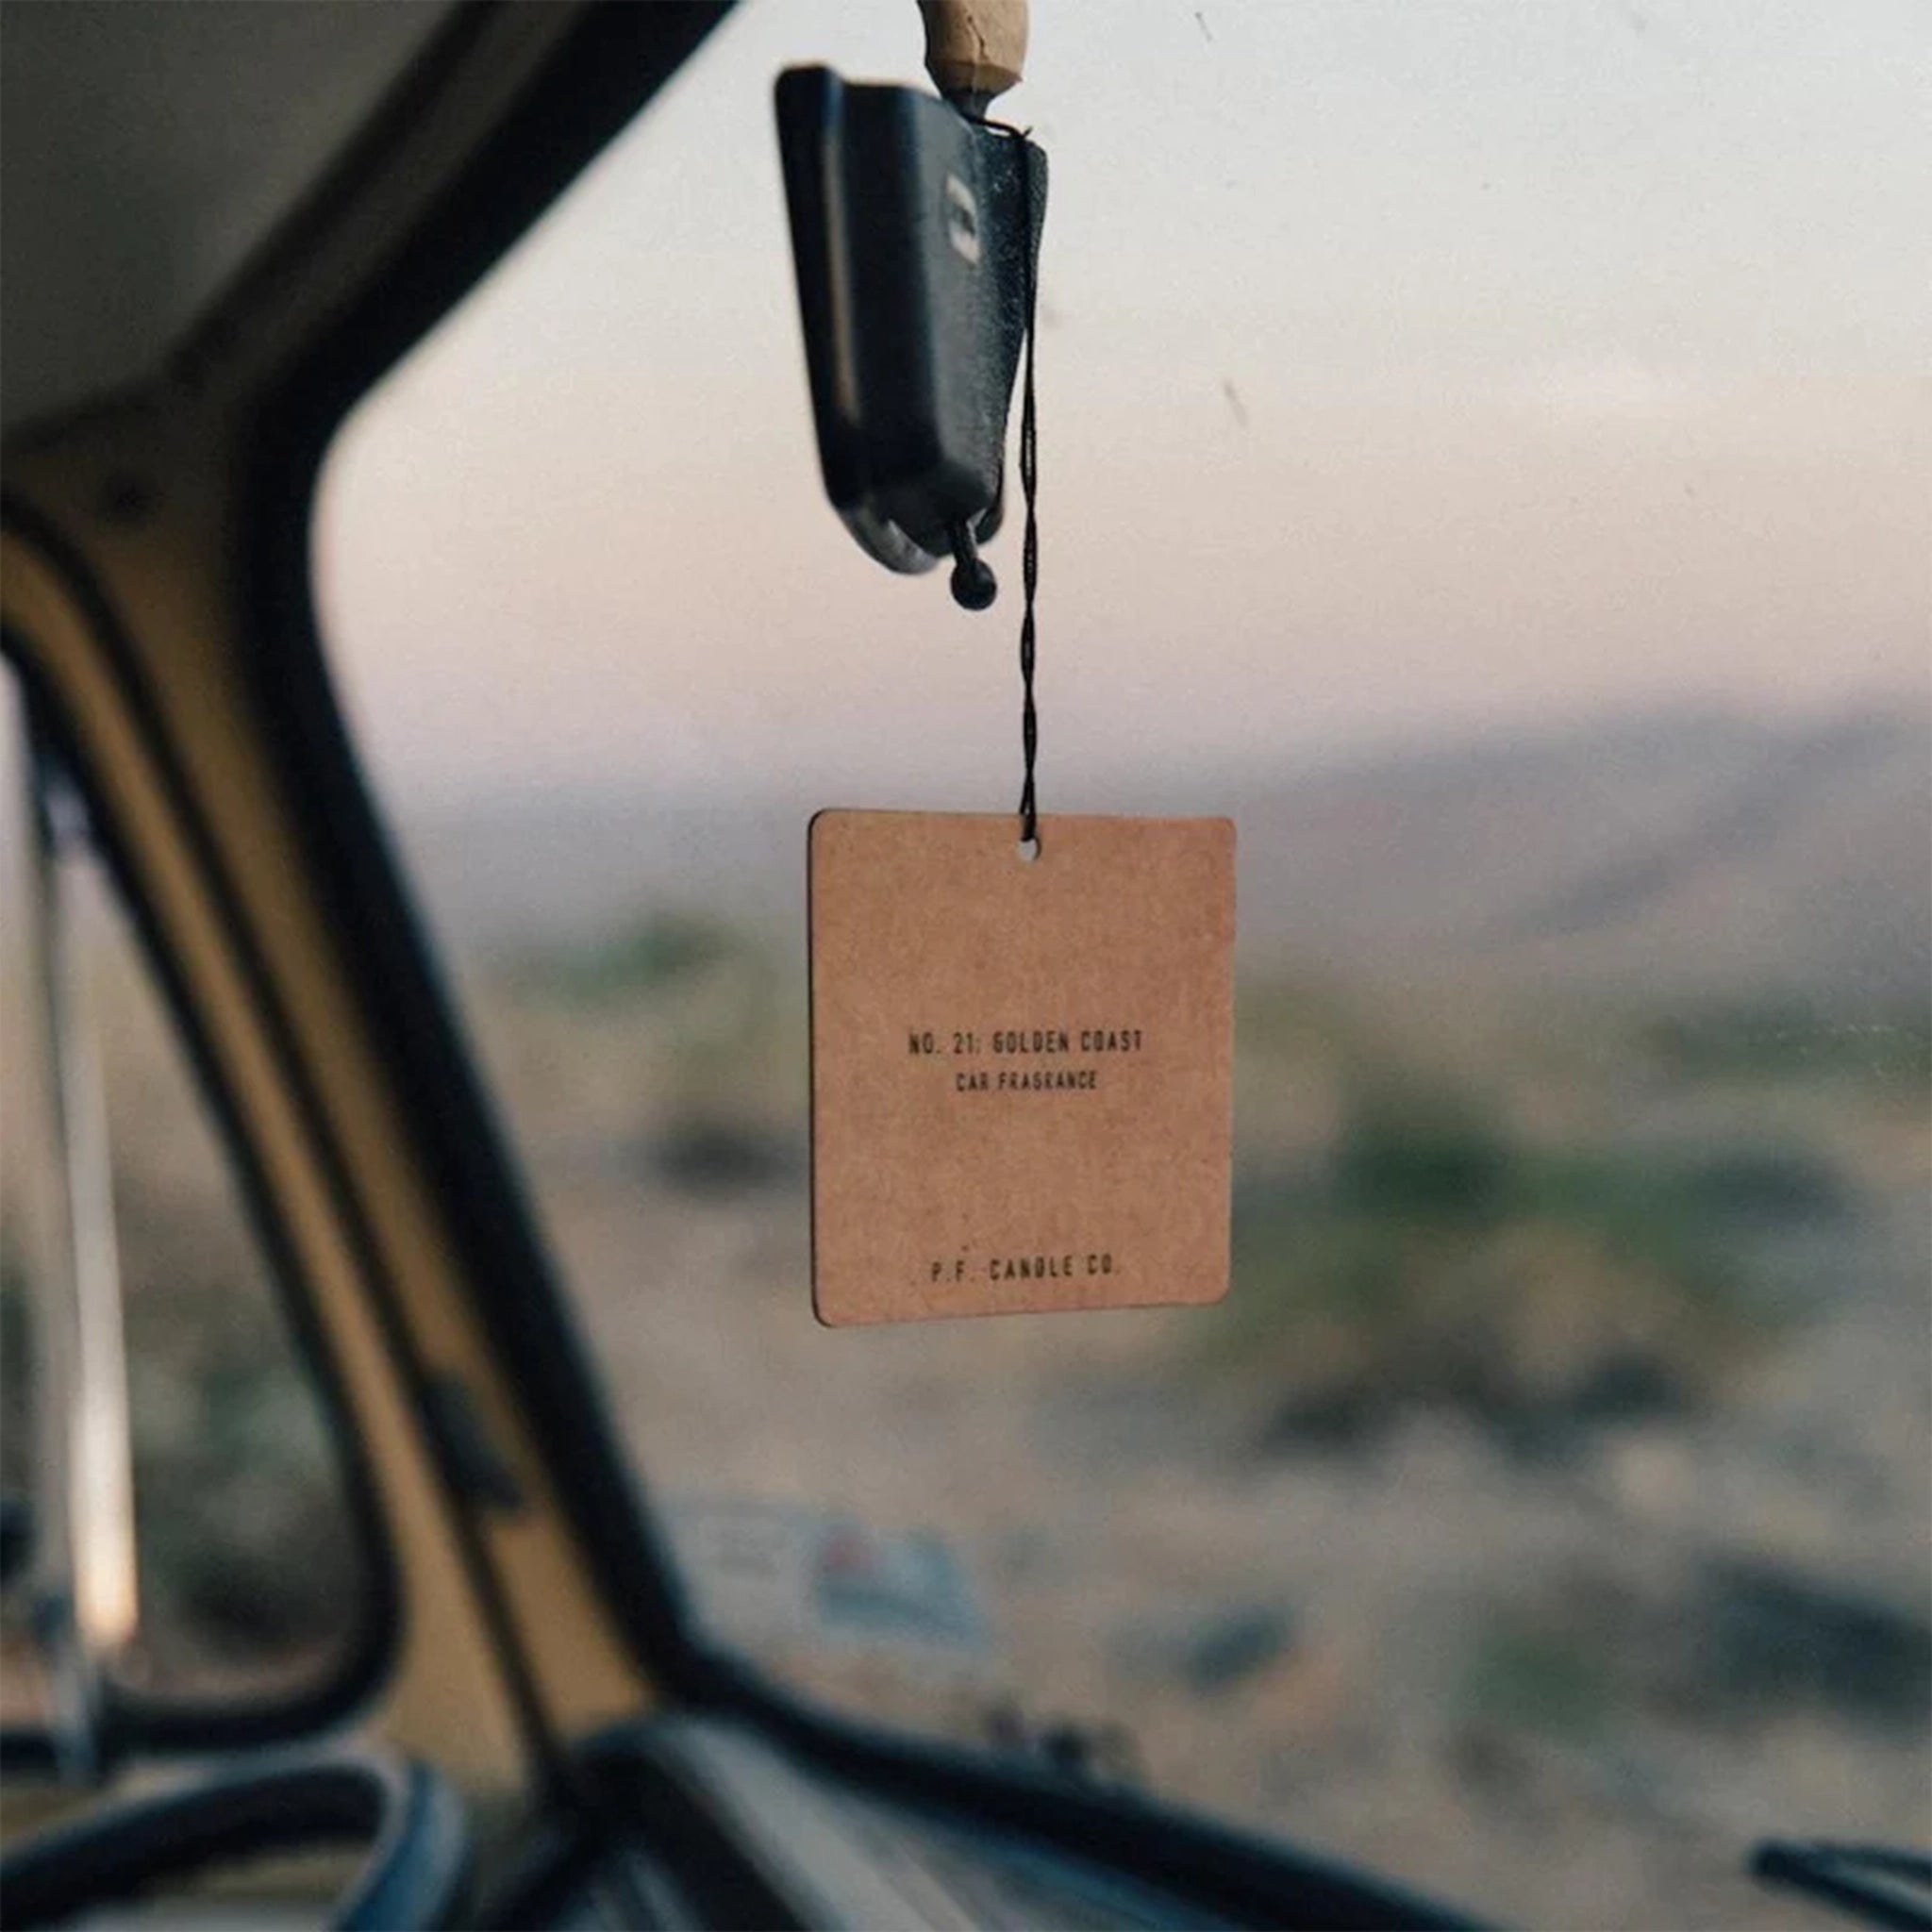 The square cardboard car fragrance hanging on the rear view mirror of a car. 